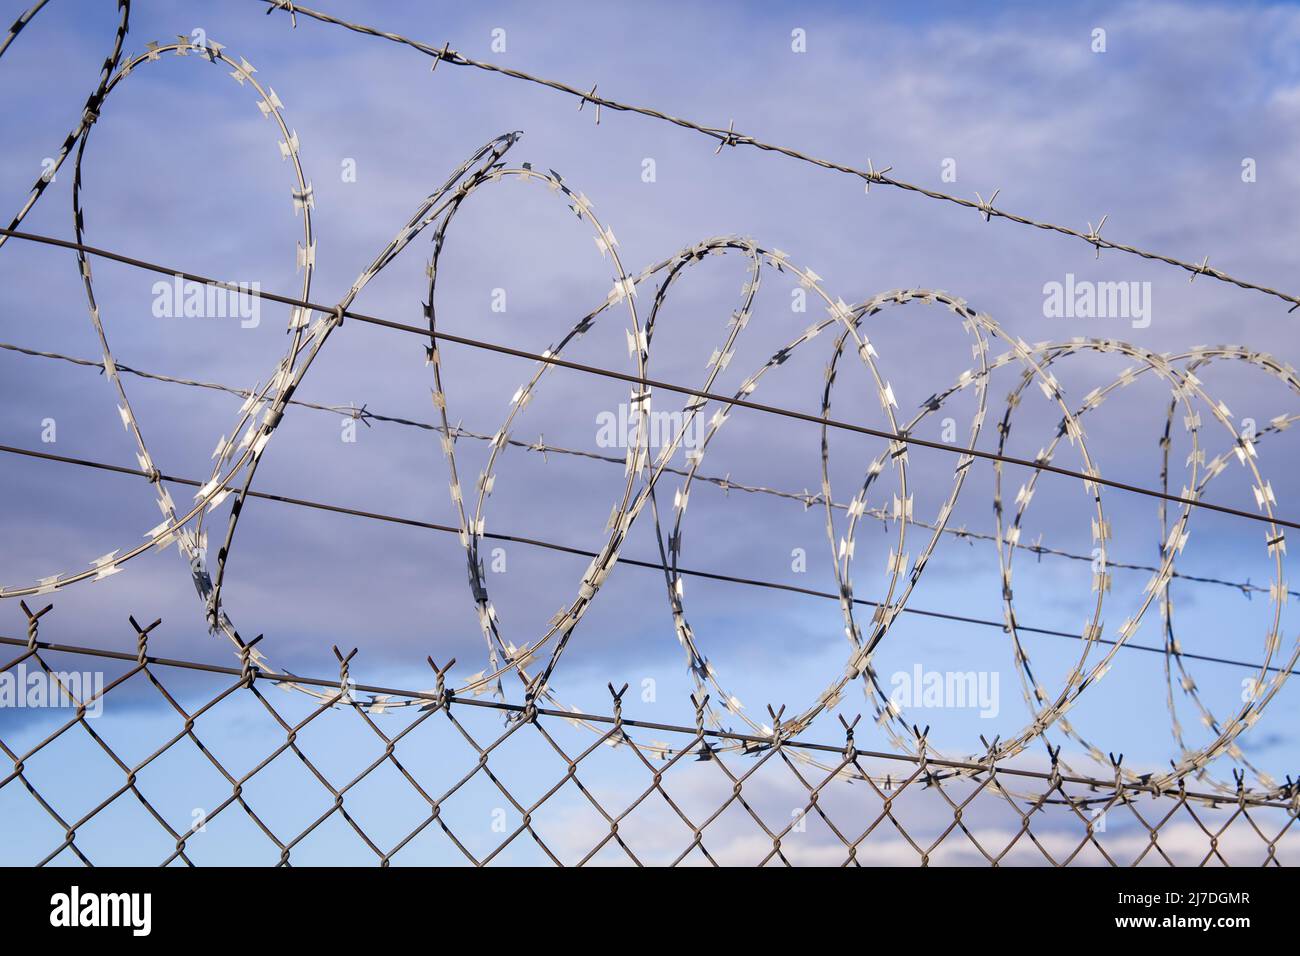 Closeup focus view of NATO barb wire with sharp and dangerous razor blades Stock Photo